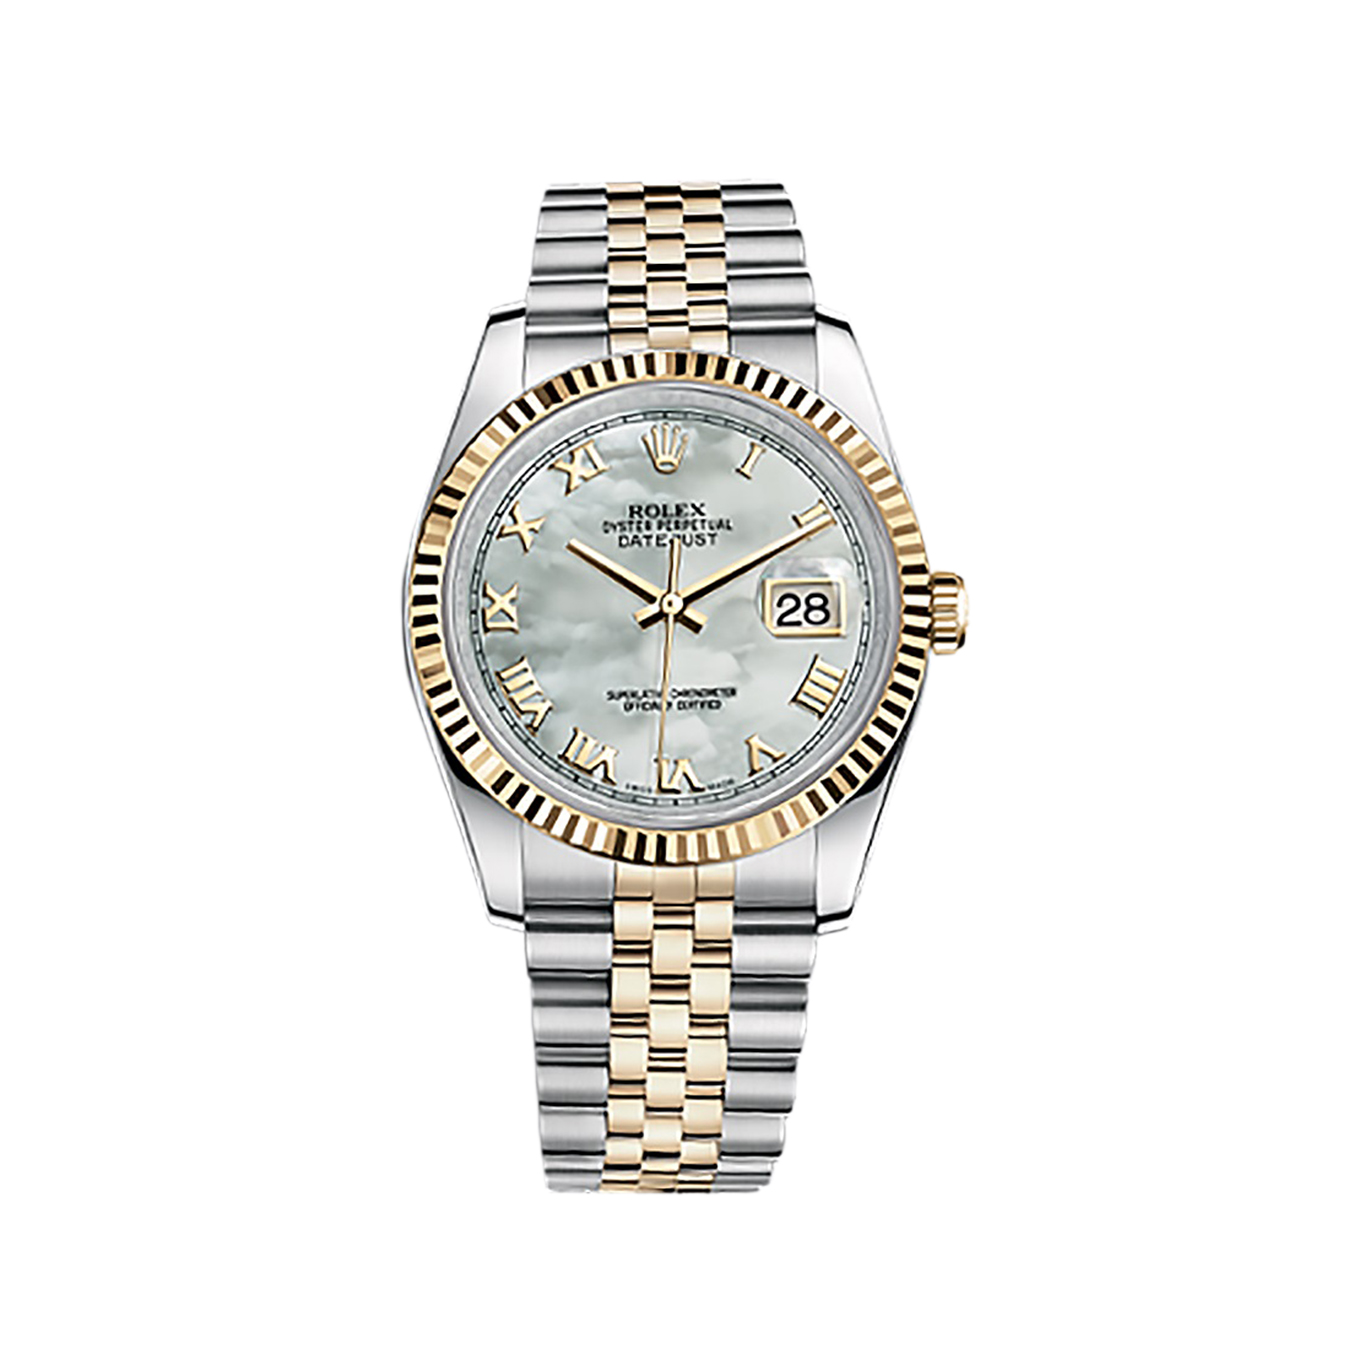 Datejust 36 116233 Gold & Stainless Steel Watch (White Mother-of-Pearl) - Click Image to Close